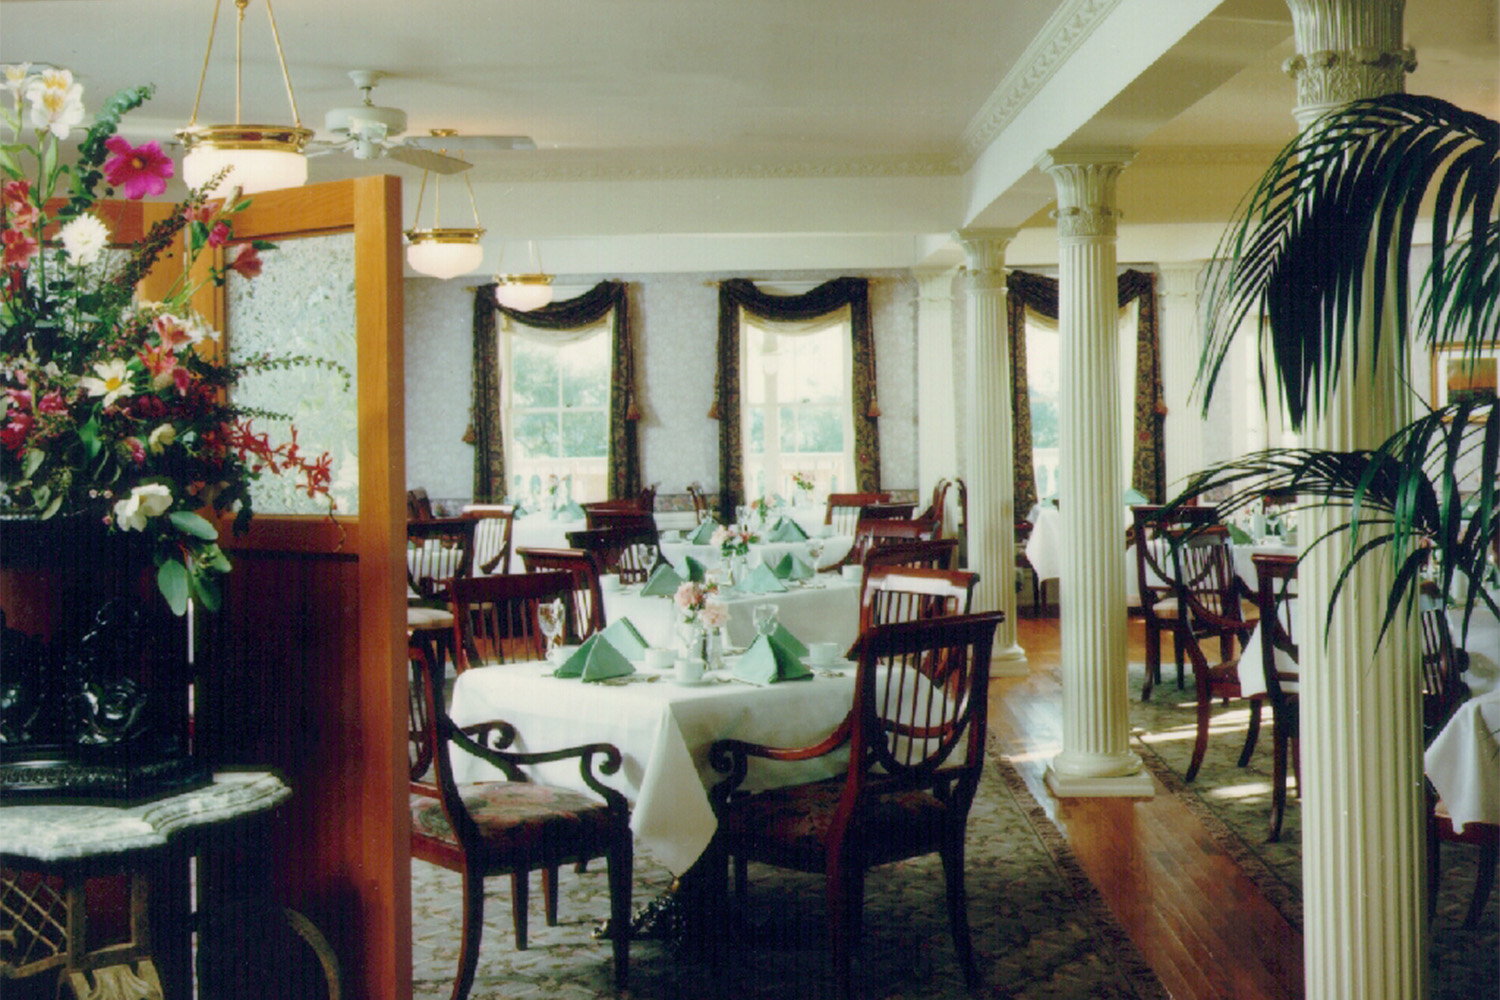 dining area with planters near the window sill 